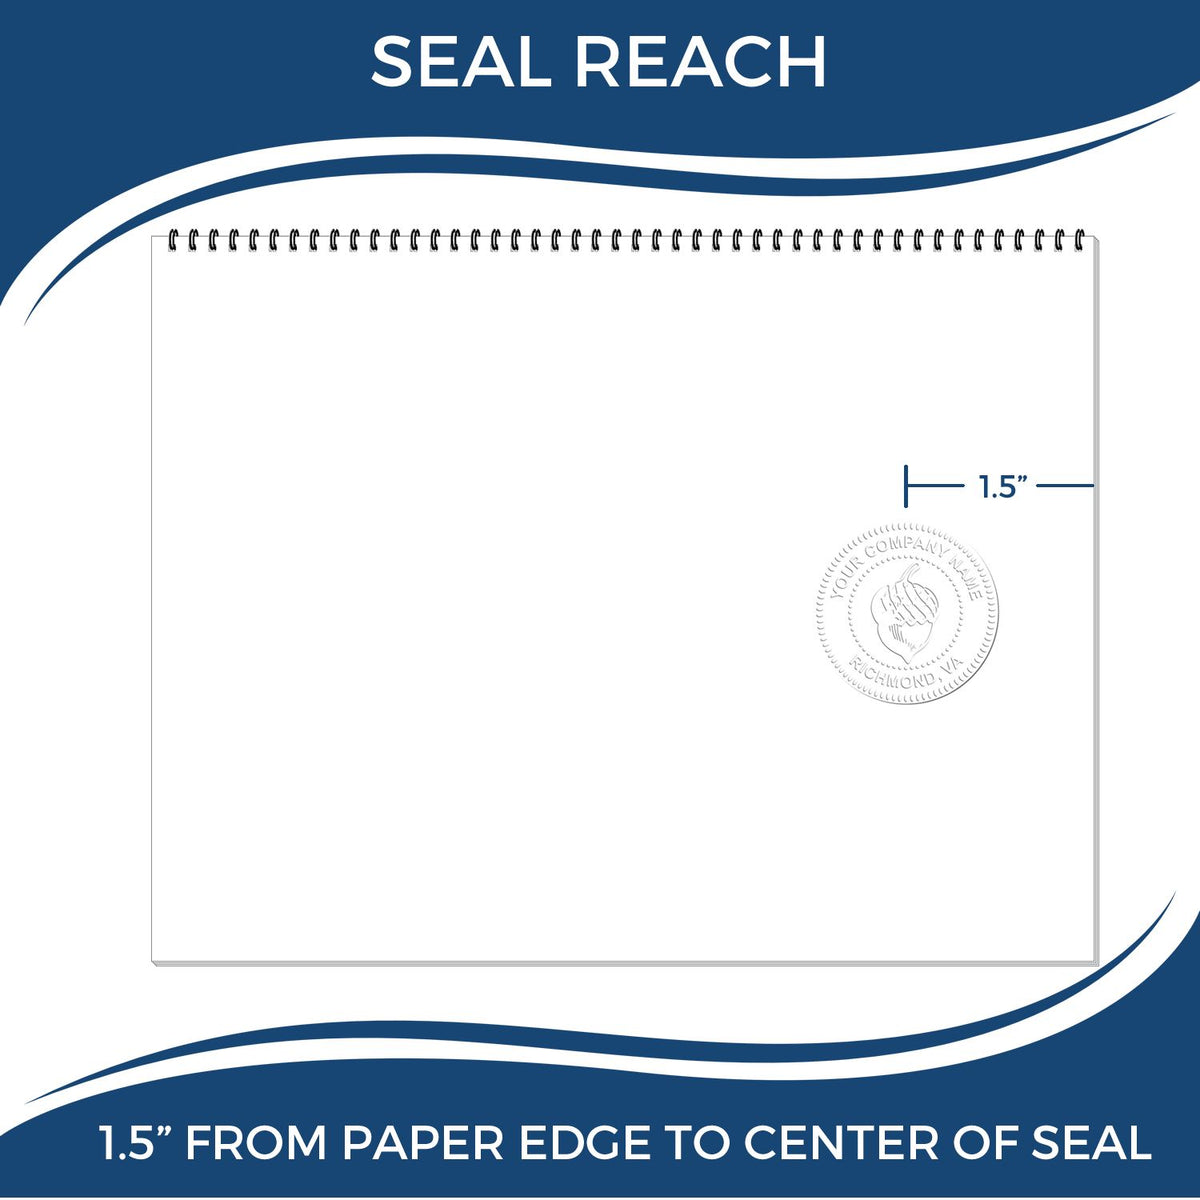 An infographic showing the seal reach which is represented by a ruler and a miniature seal image of the Michigan Desk Surveyor Seal Embosser